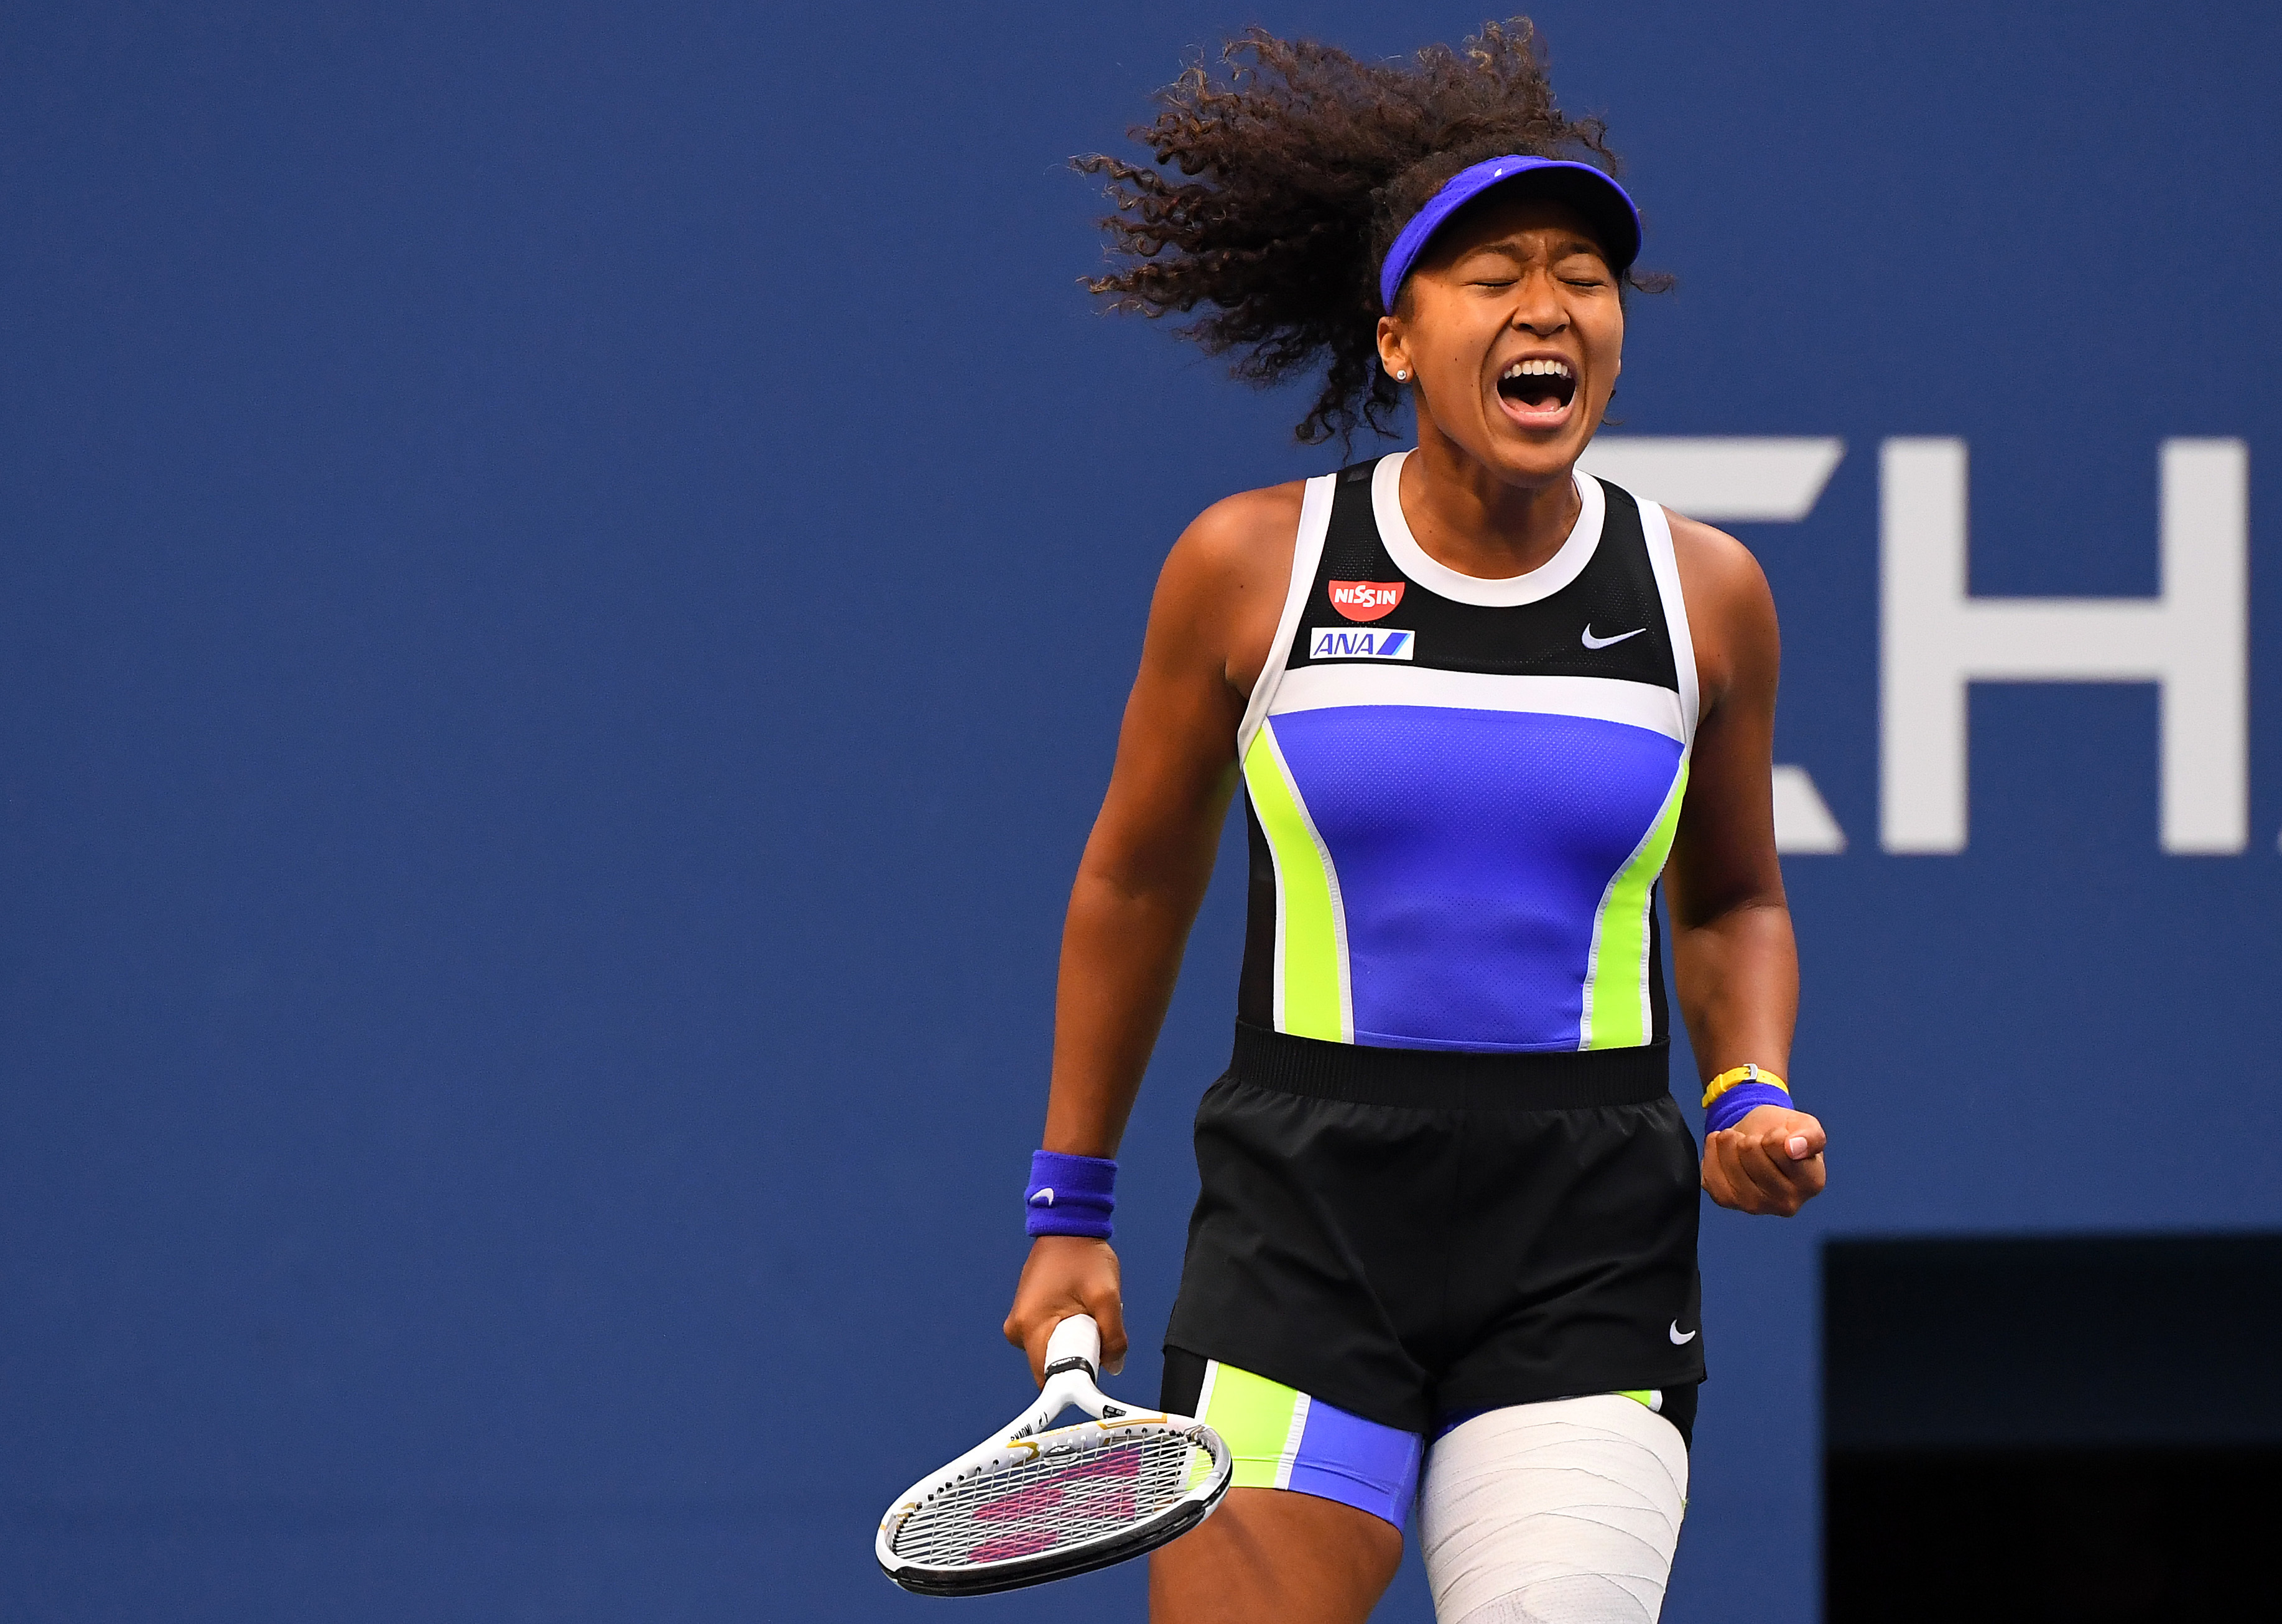 French Open champion Iga Swiatek and US Open winner Naomi Osaka among nominees for WTAs Player of the Year award NewsChain